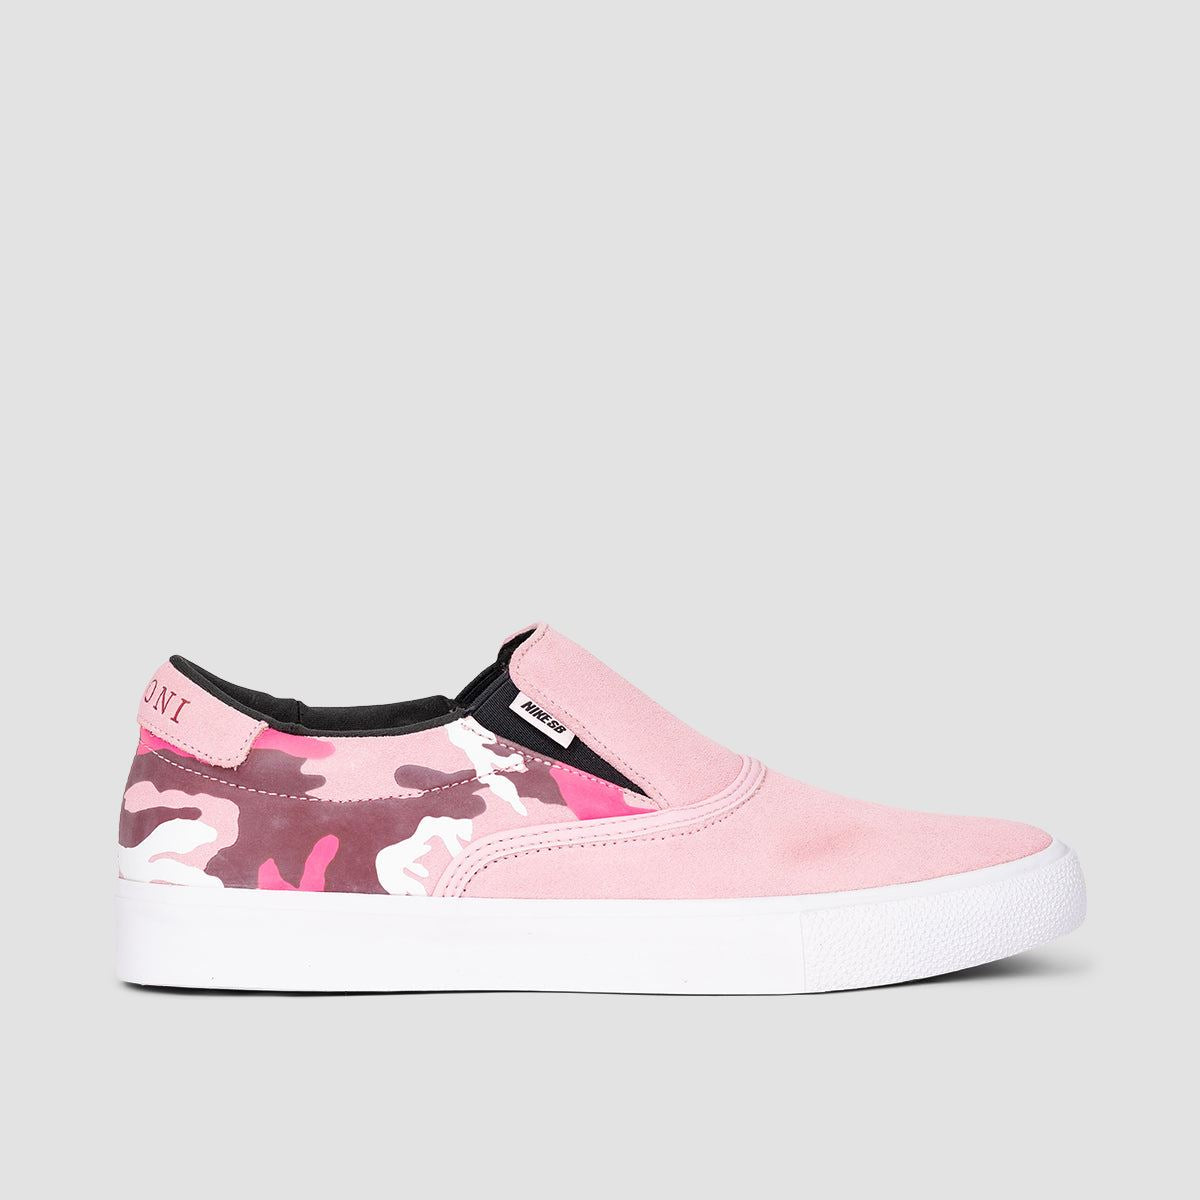 Nike SB Zoom Verona Slip x Leticia Bufoni Shoes - Prism Pink/Team Red/Pinksicle/White